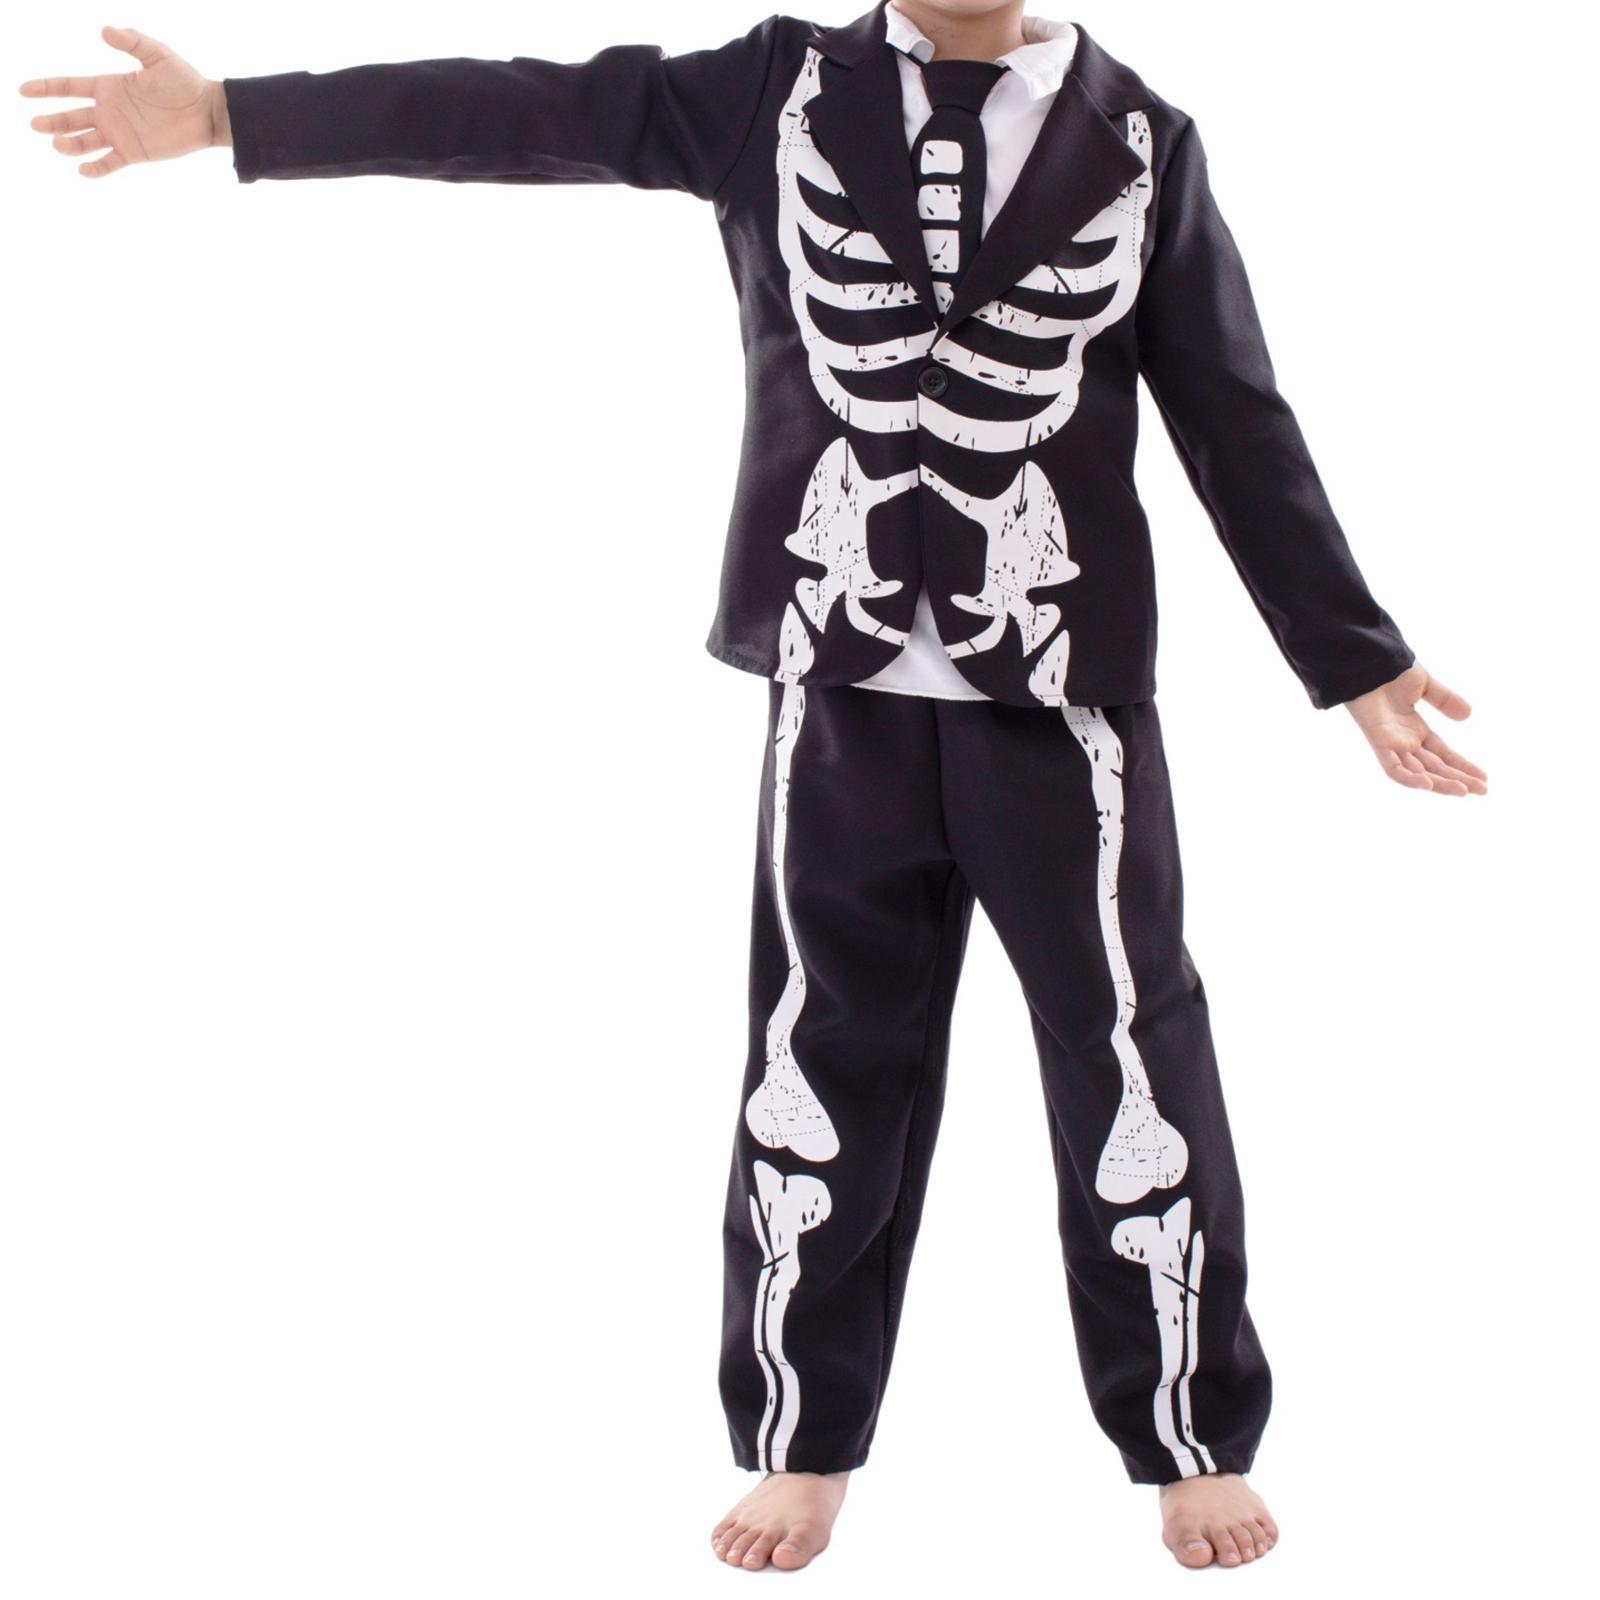 Halloween Skeleton Costume Clothes Kids Dress Suit for Role Play Party Favor